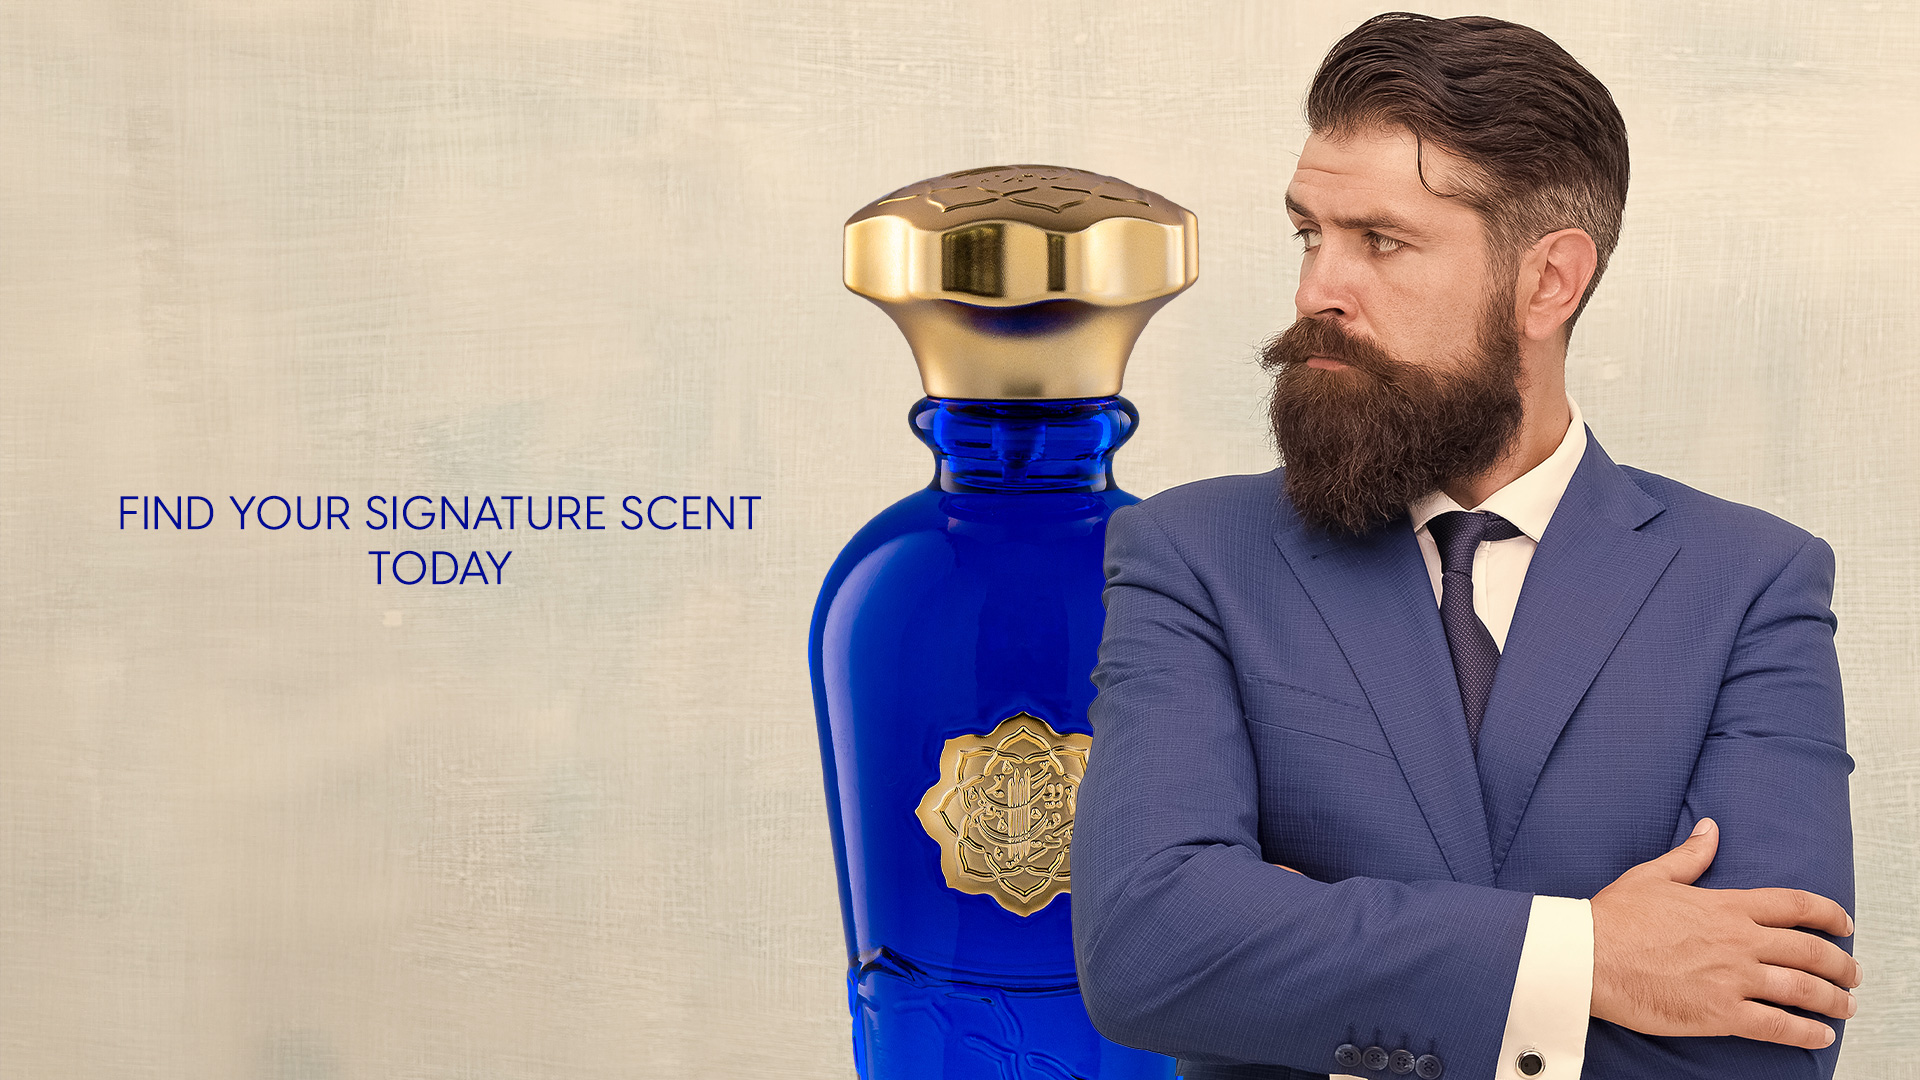 Find Your Signature Scent Today: Best Perfume Brands for Men